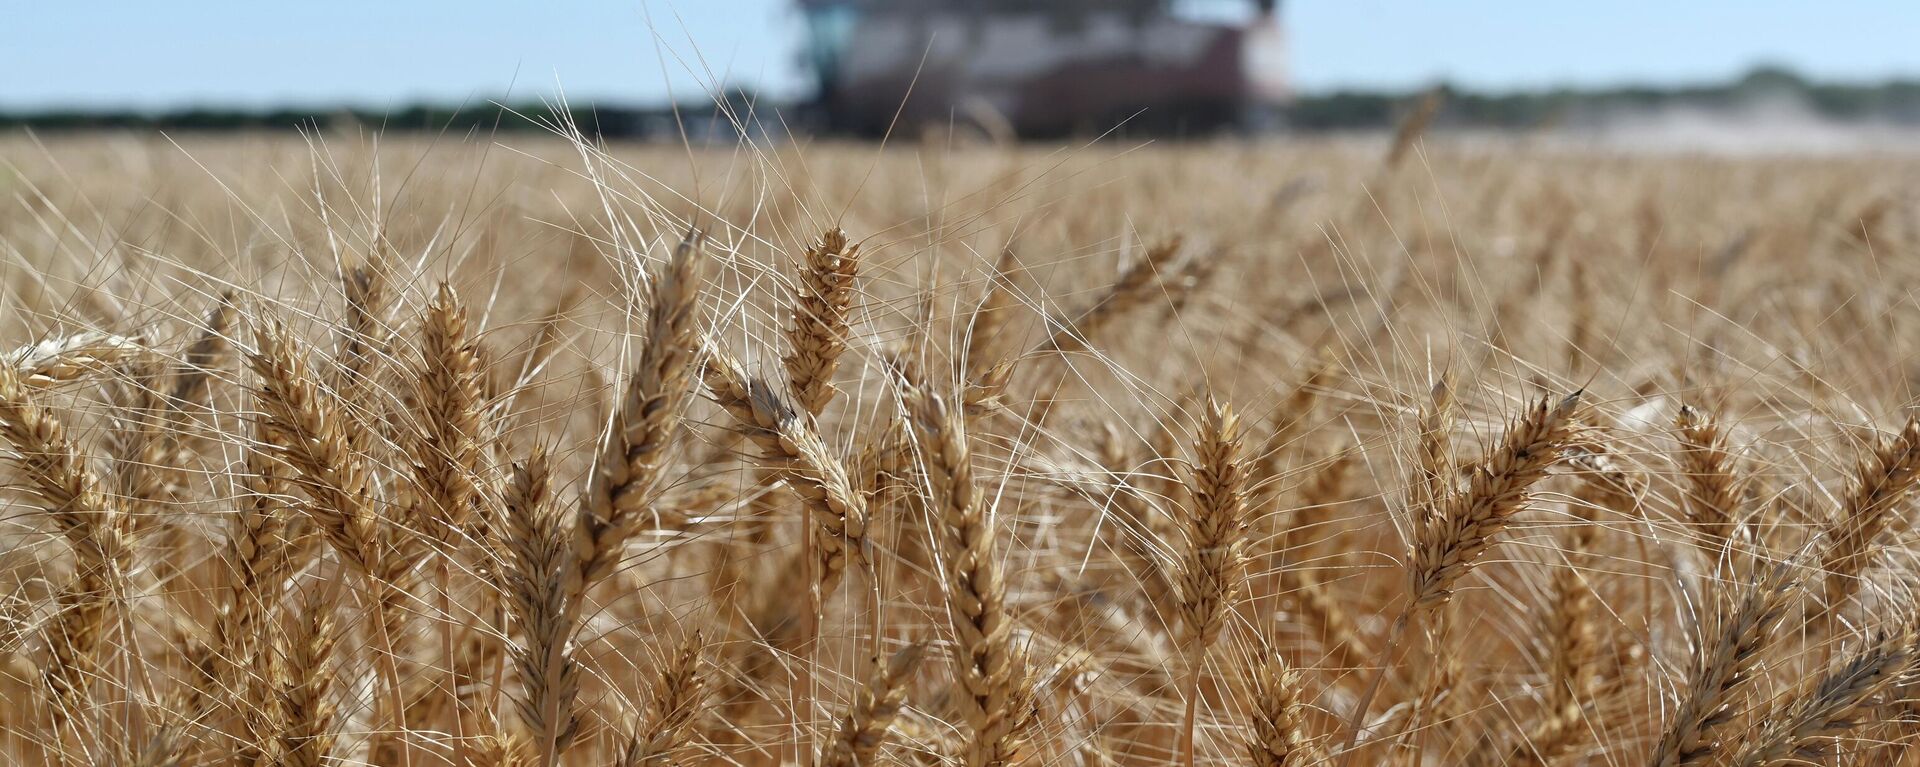 A harvester collects wheat in Semikarakorsky District of Rostov-on-Don region near Semikarakorsk, Southern Russia, Wednesday, July 6, 2022. Russia is the world's biggest exporter of wheat, accounting for almost a fifth of global shipments. It is expected to have one of its best ever crop seasons this year. Agriculture is among the most important industries in Russia, accounting for around 4% of its GDP, according to the World Bank. (AP Photo) - Sputnik International, 1920, 06.03.2023